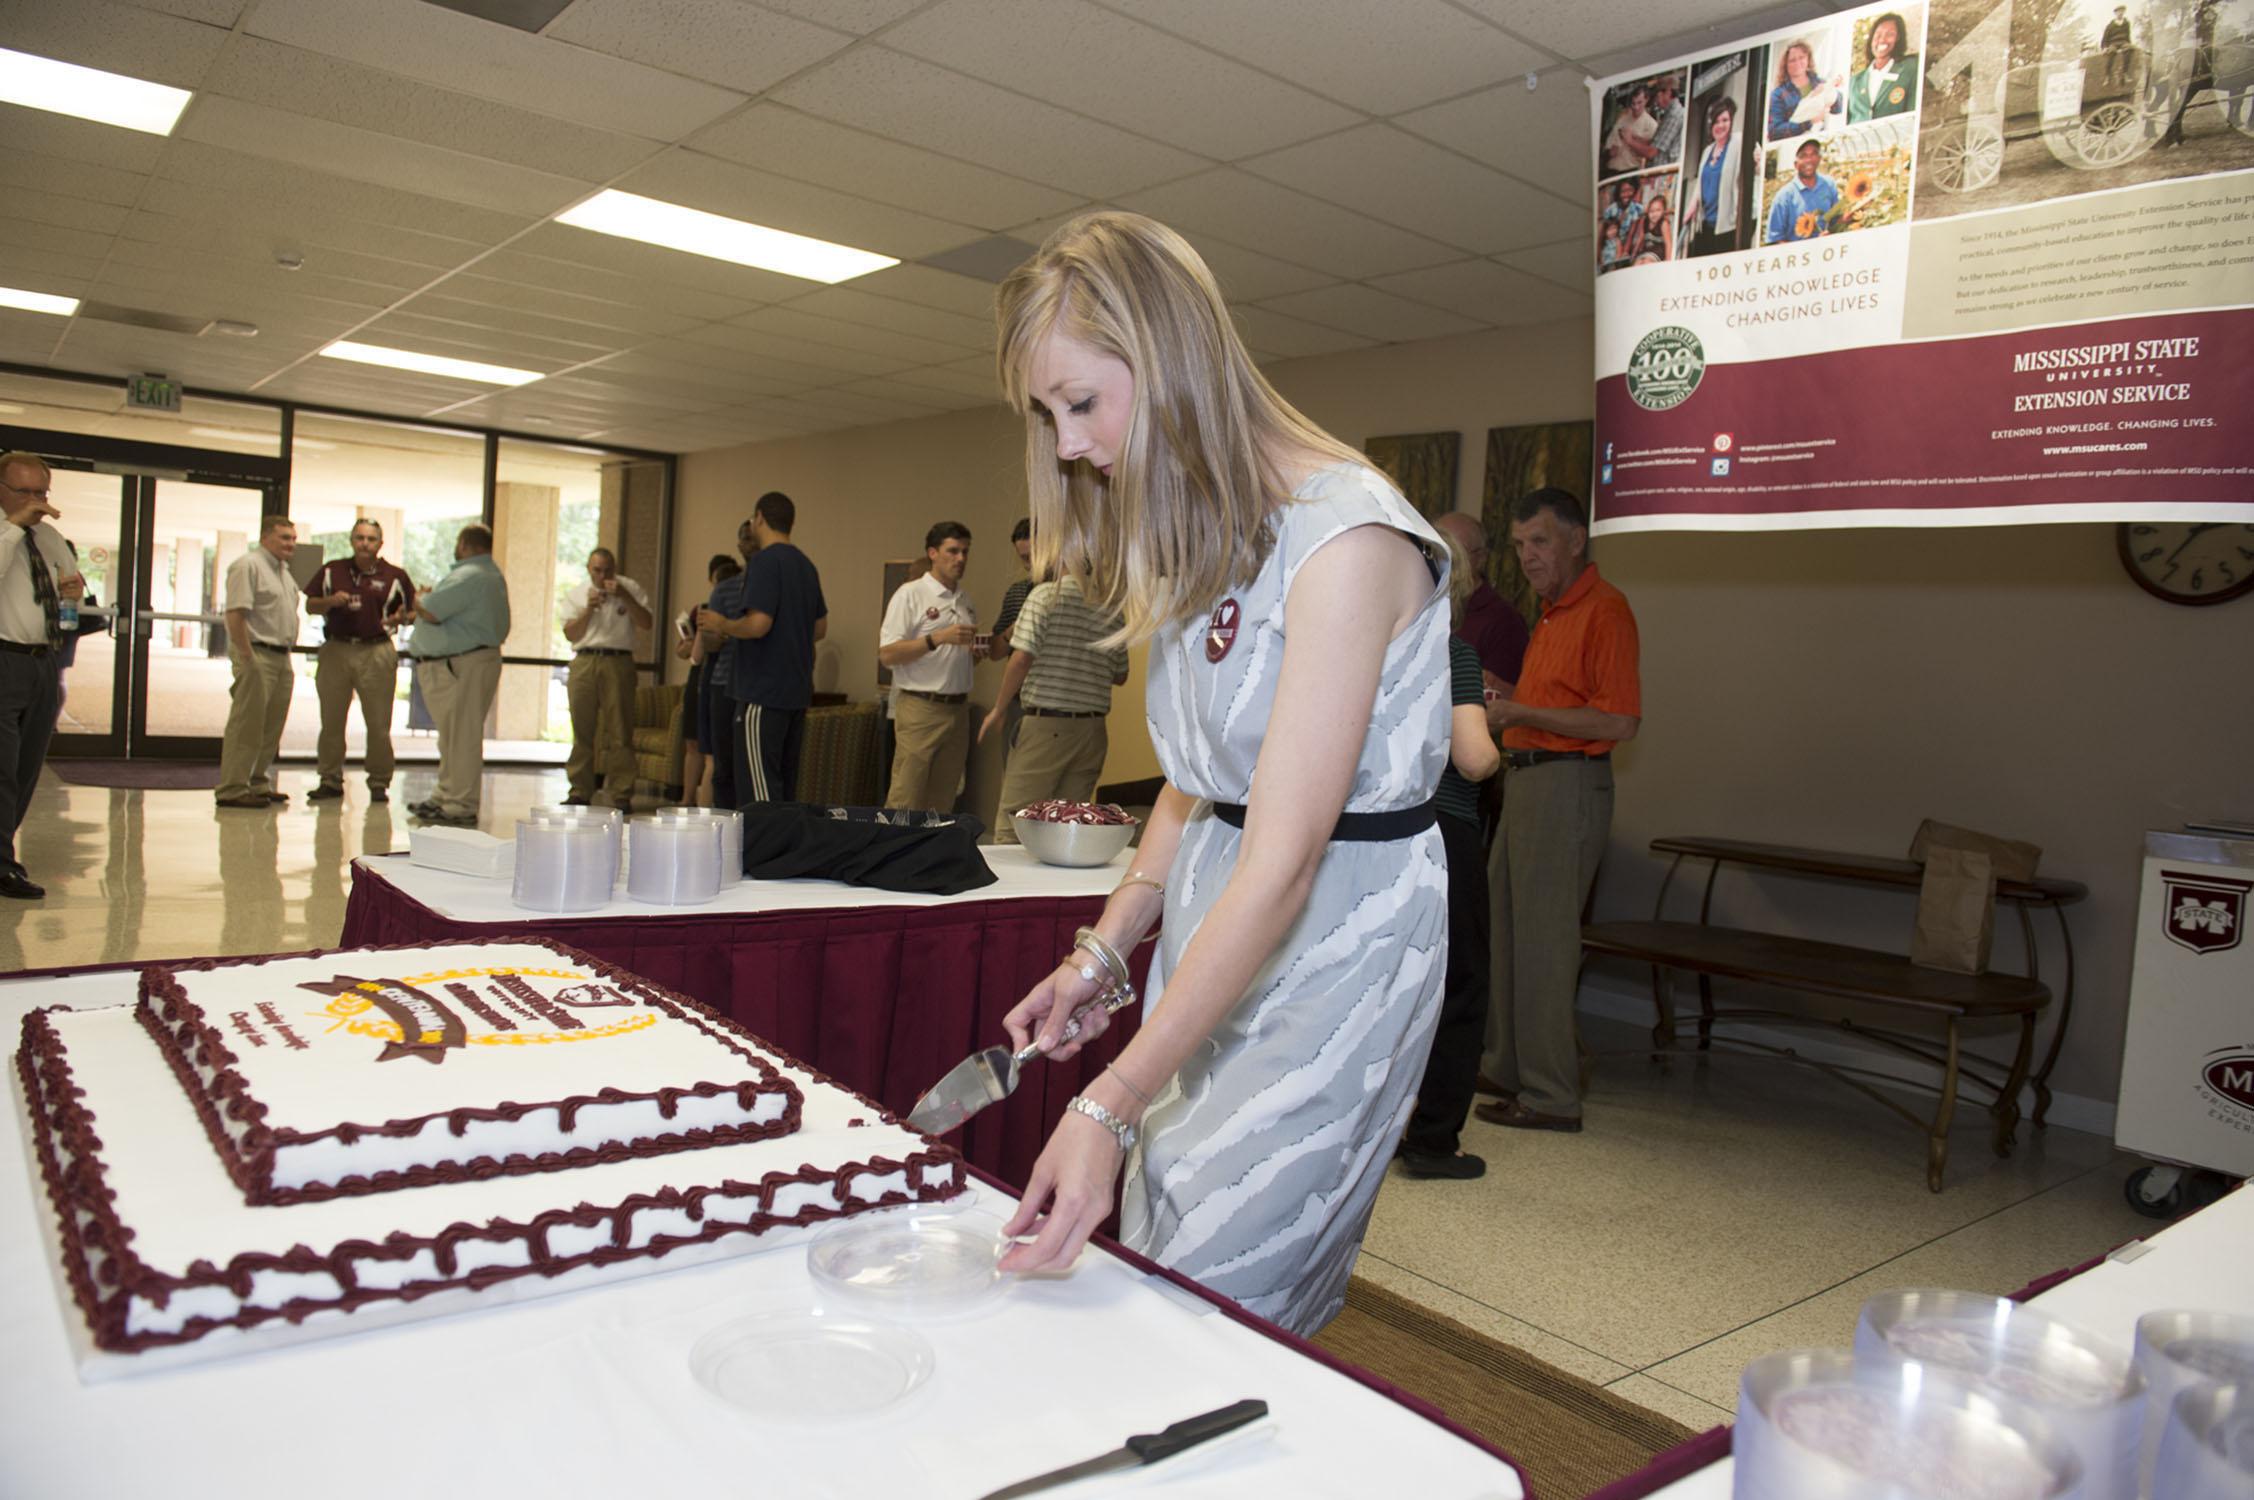 Meaghan Gordon, marketing coordinator at the Mississippi State University Office of Agricultural Communications, cuts the cake May 8, 2014 at the Bost Extension Center that commemorates the 100th anniversary of the Extension Service. Friends of the Extension Service gathered in similar events around the state to celebrate the anniversary. (Photo by MSU Public Affairs/Megan Bean)